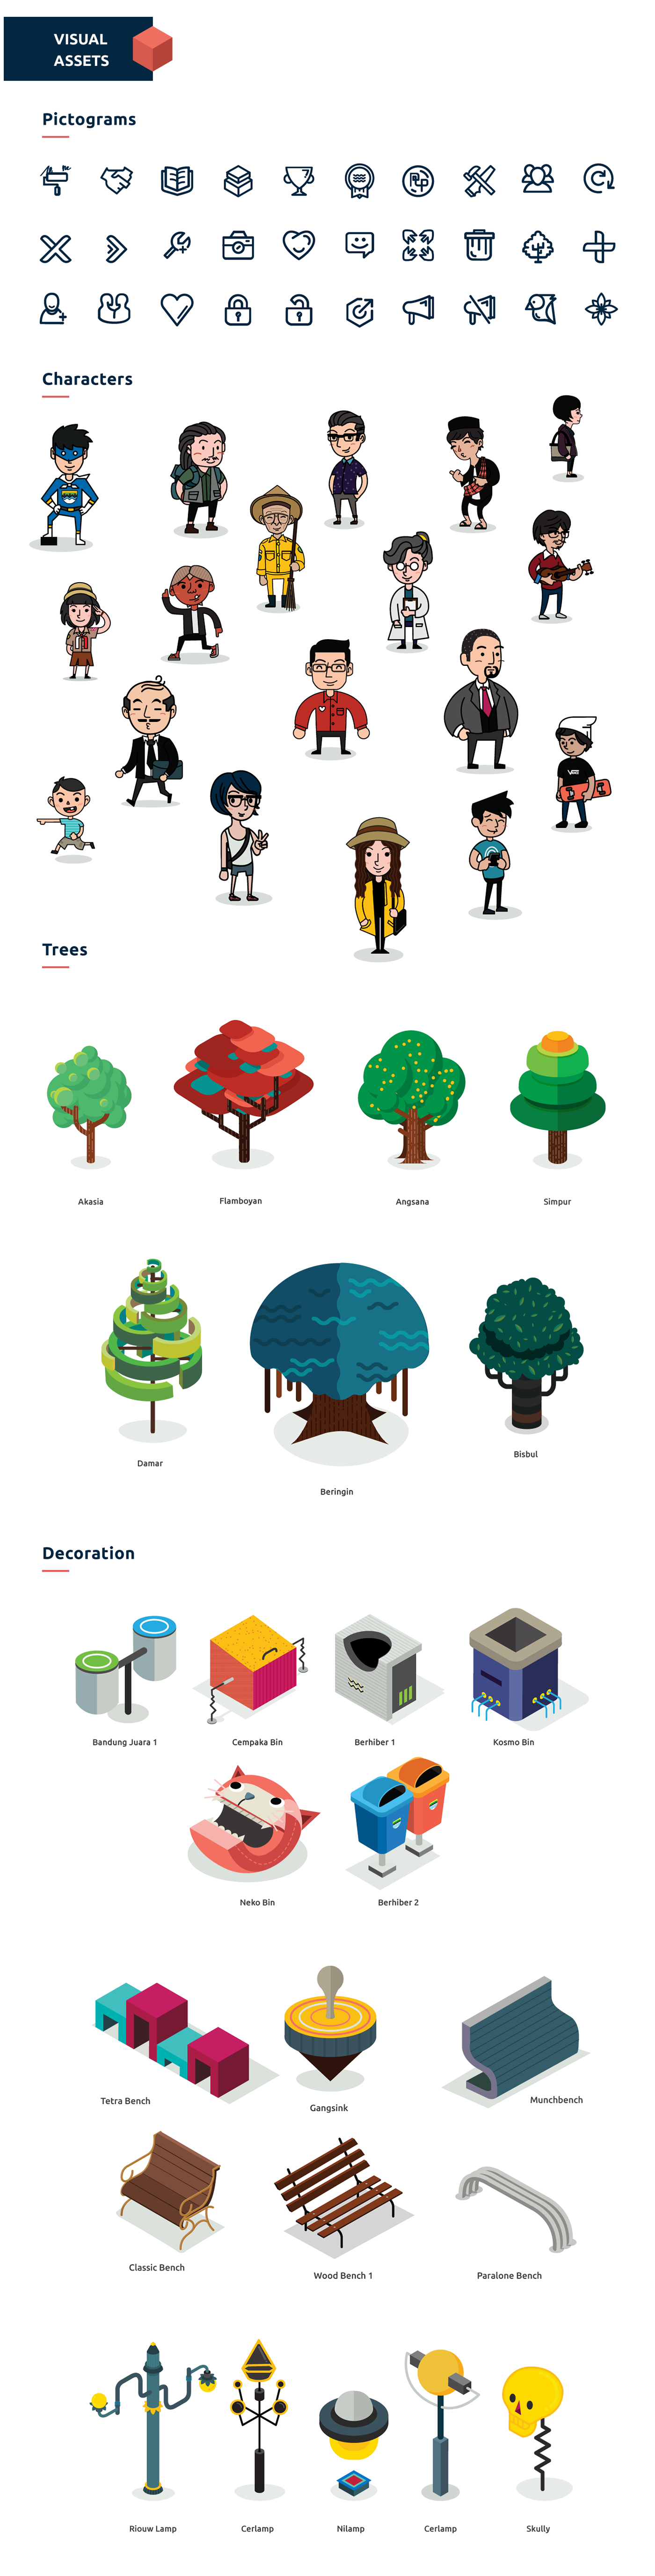 bandung mobile game Thematic Parks simulation game concept vector City branding adaa_2015 adaa_school ot adaa_country indonesia adaa_game_design